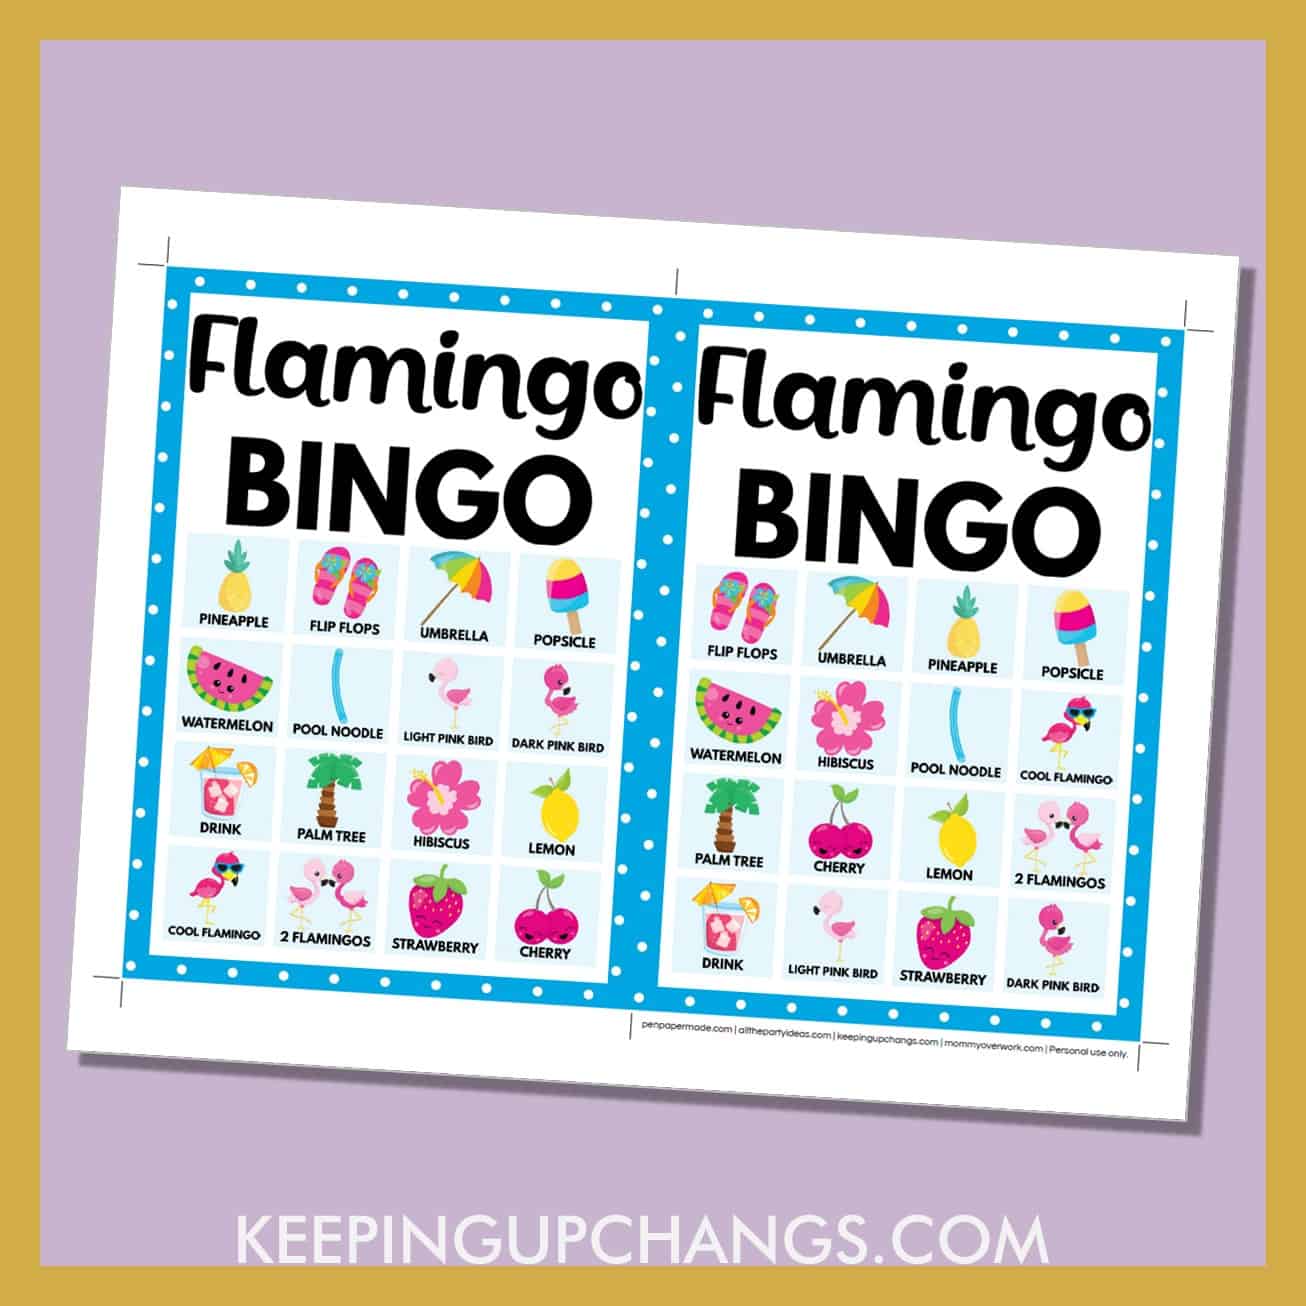 free flamingo bingo card 4x4 5x7 game boards with images and text words.